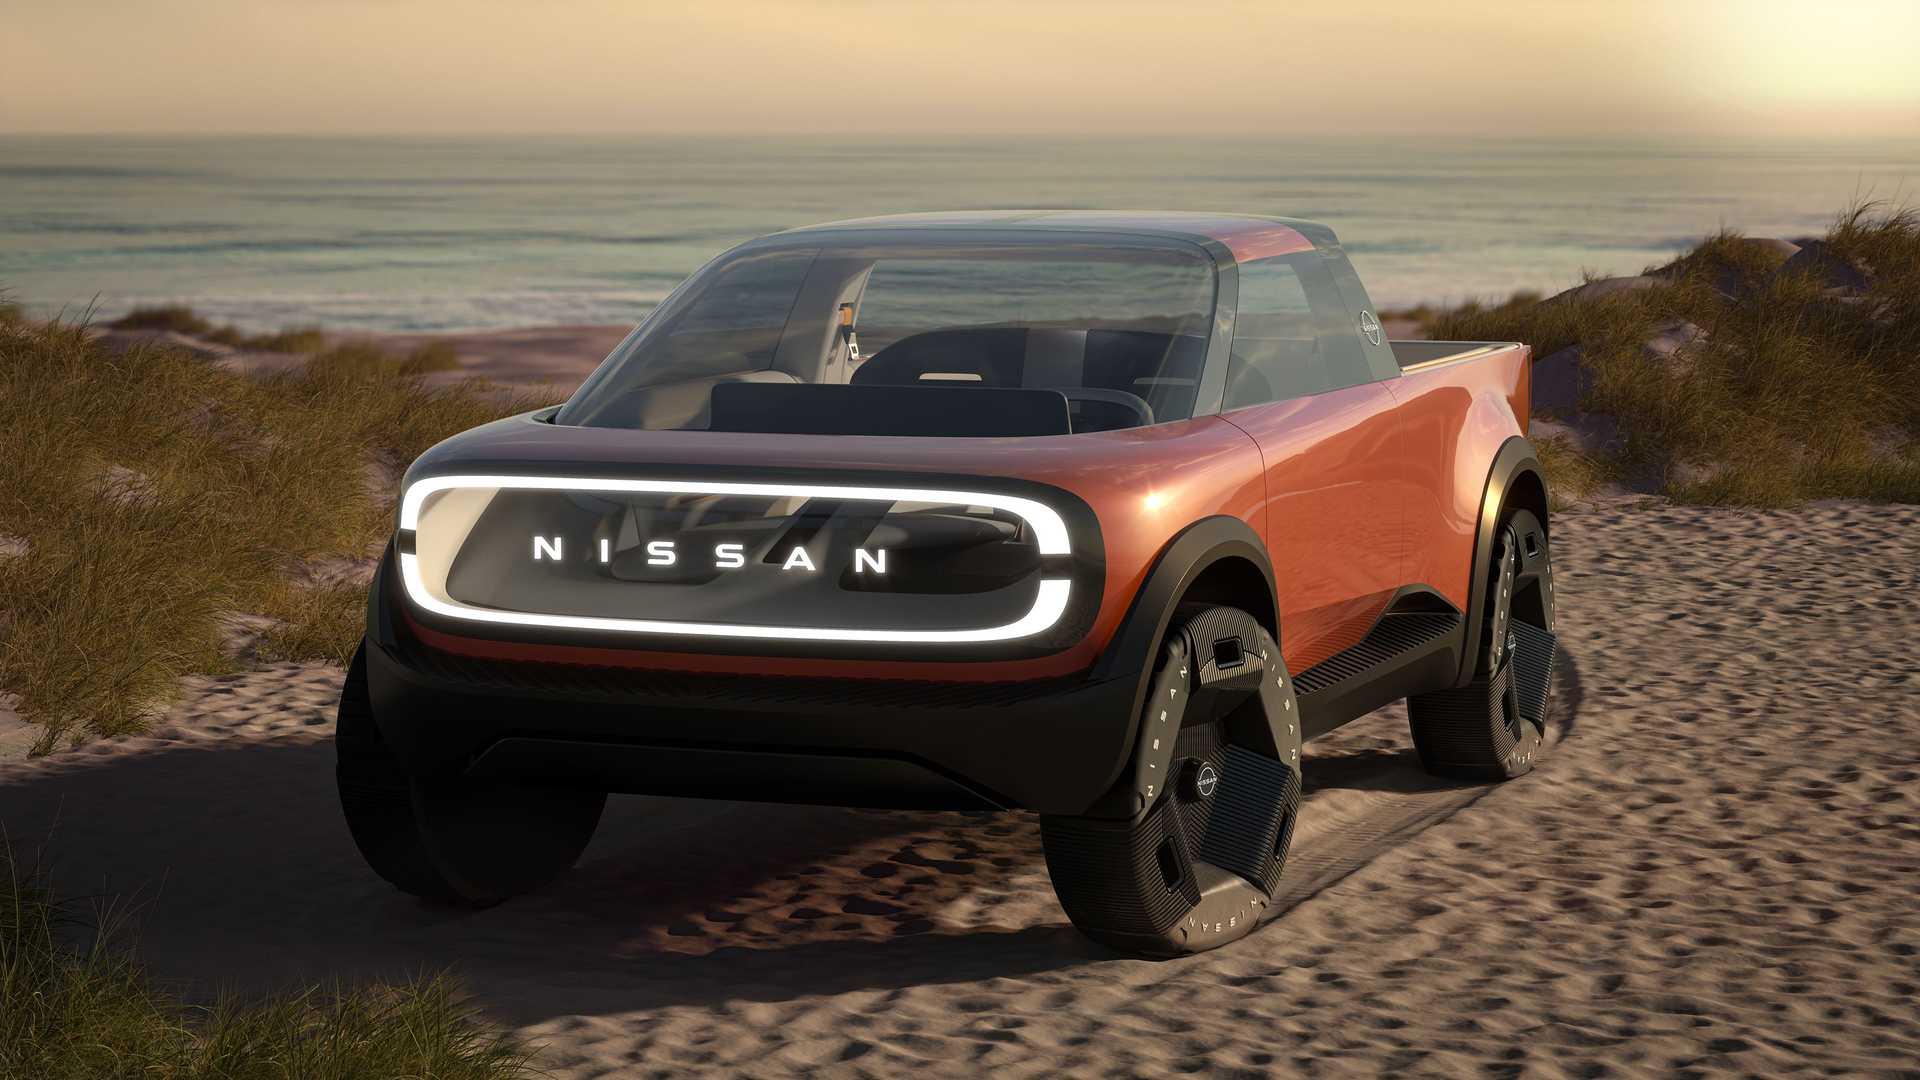 Conceito Nissan Surf-Out